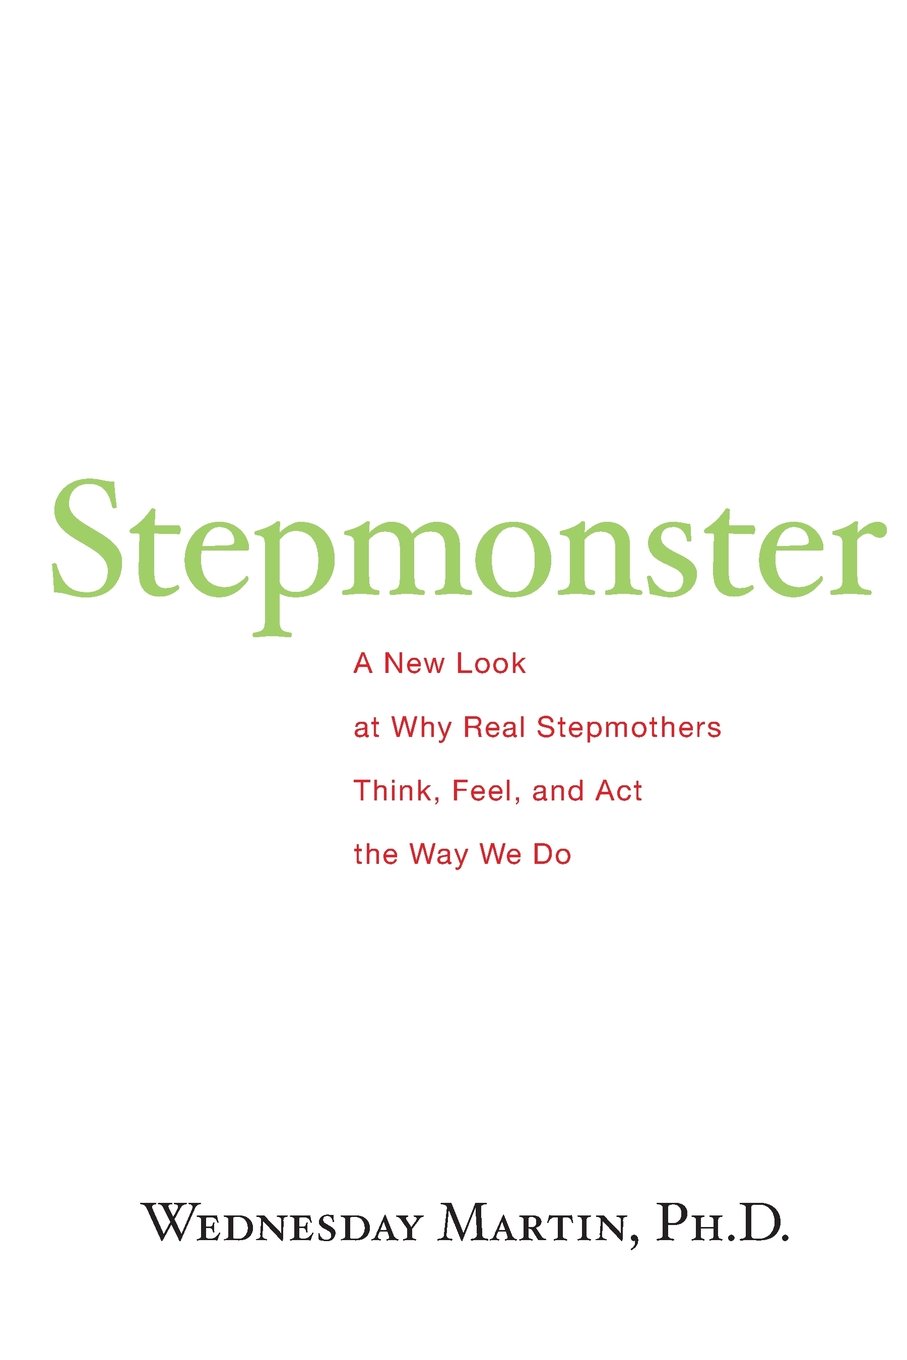 Book Review: Stepmonster: A New Look at Why Real Stepmothers Think, Feel, and Act the Way We Do